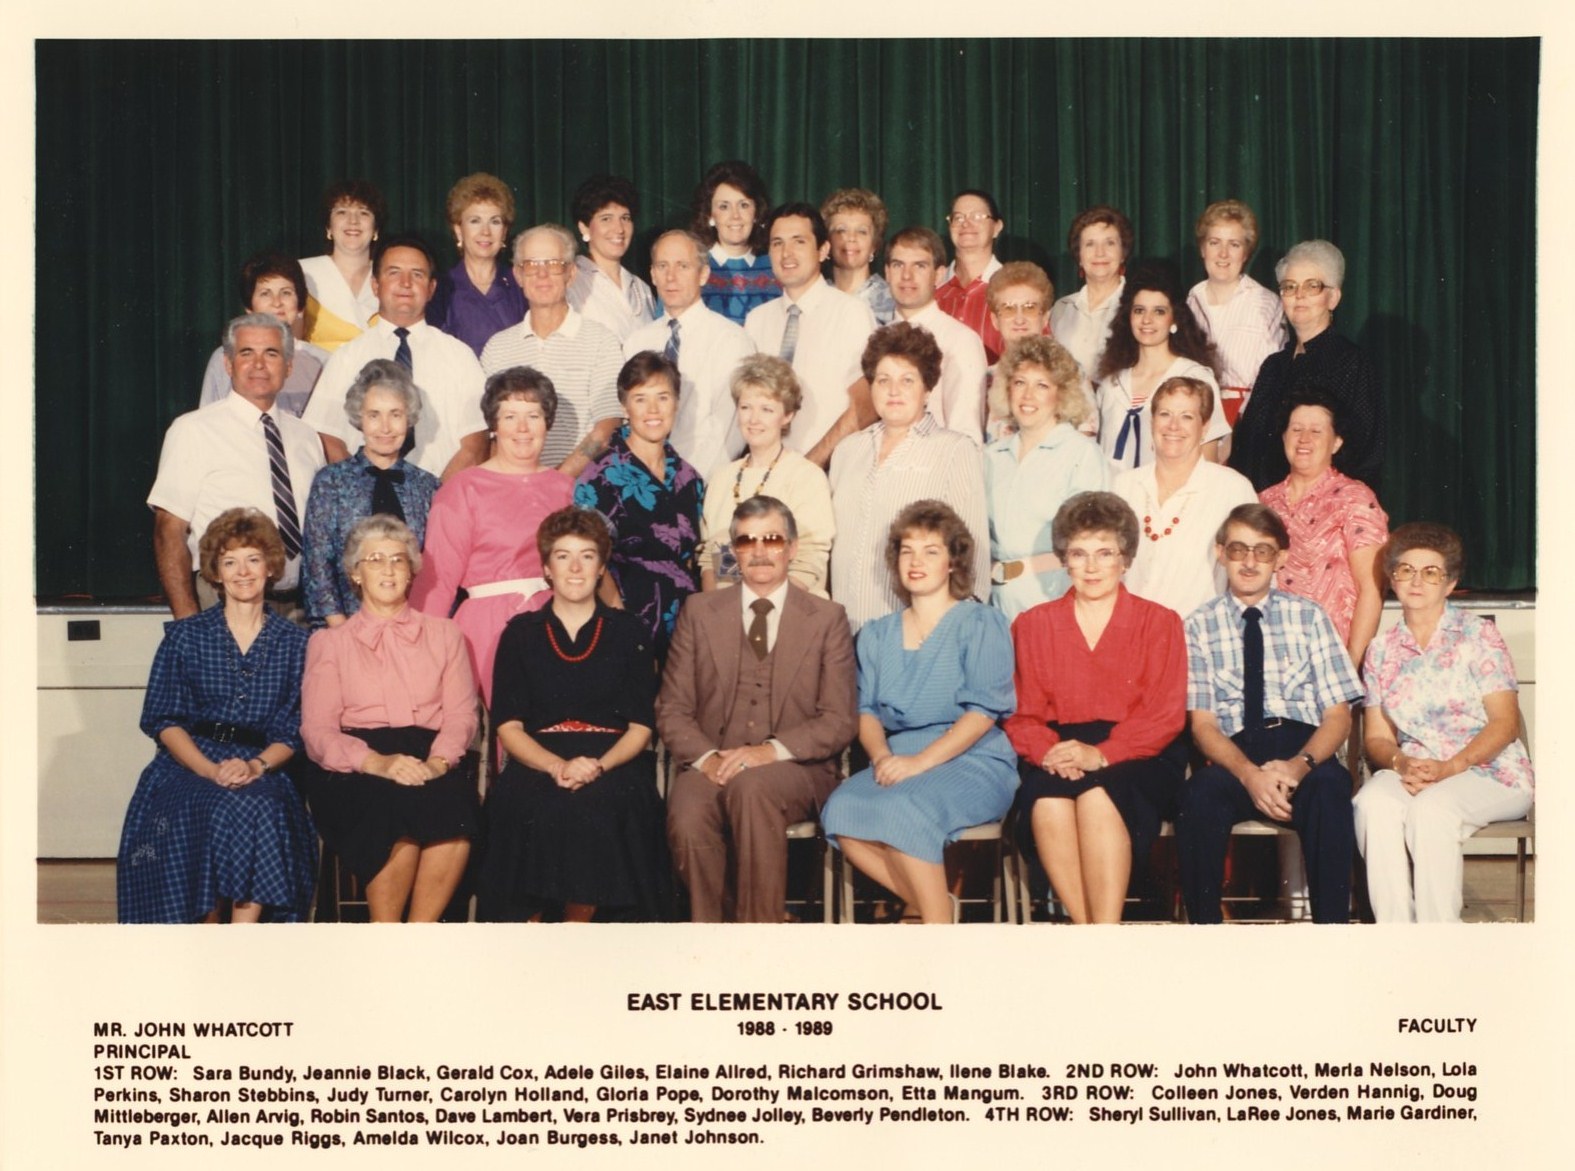 1988-1989 faculty at East Elementary School